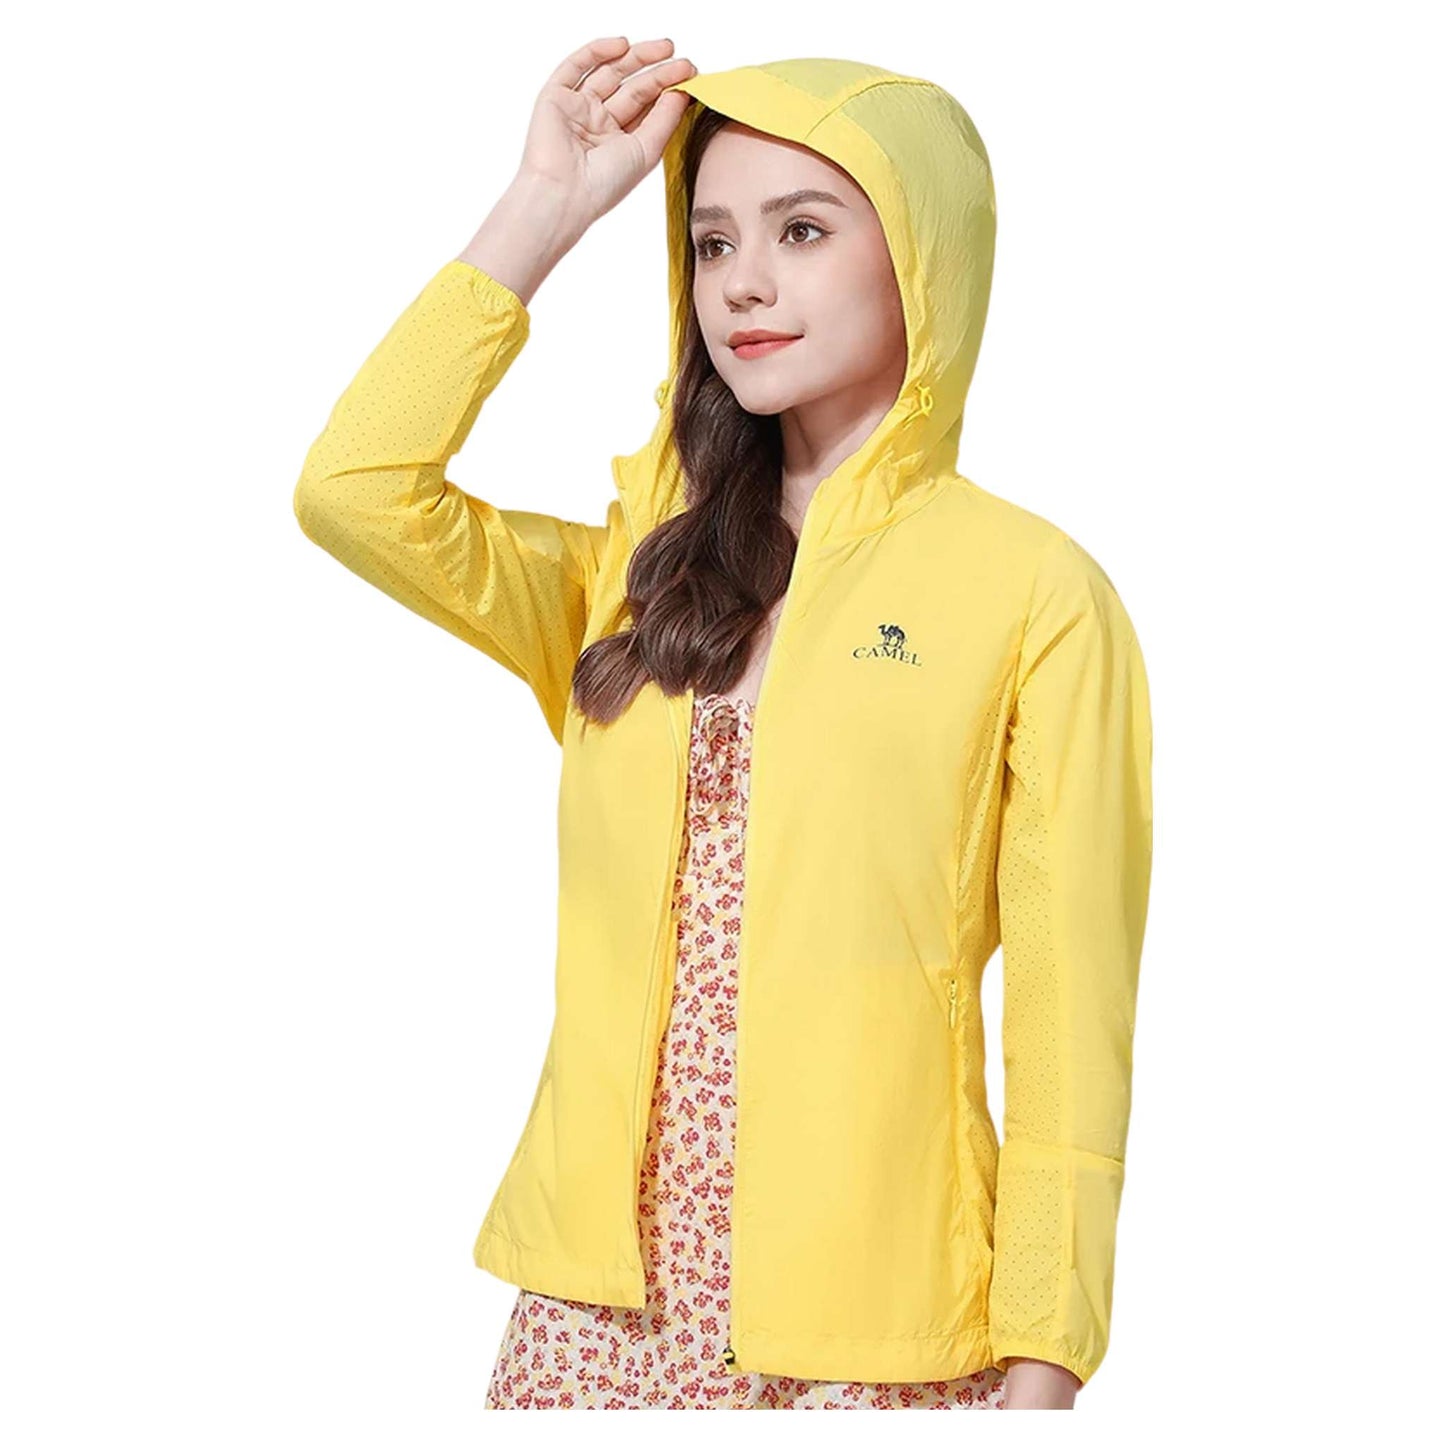 Ethereal Trailblazer Women's Hiking Jacket - Breathable & Waterproof with Sun Protection